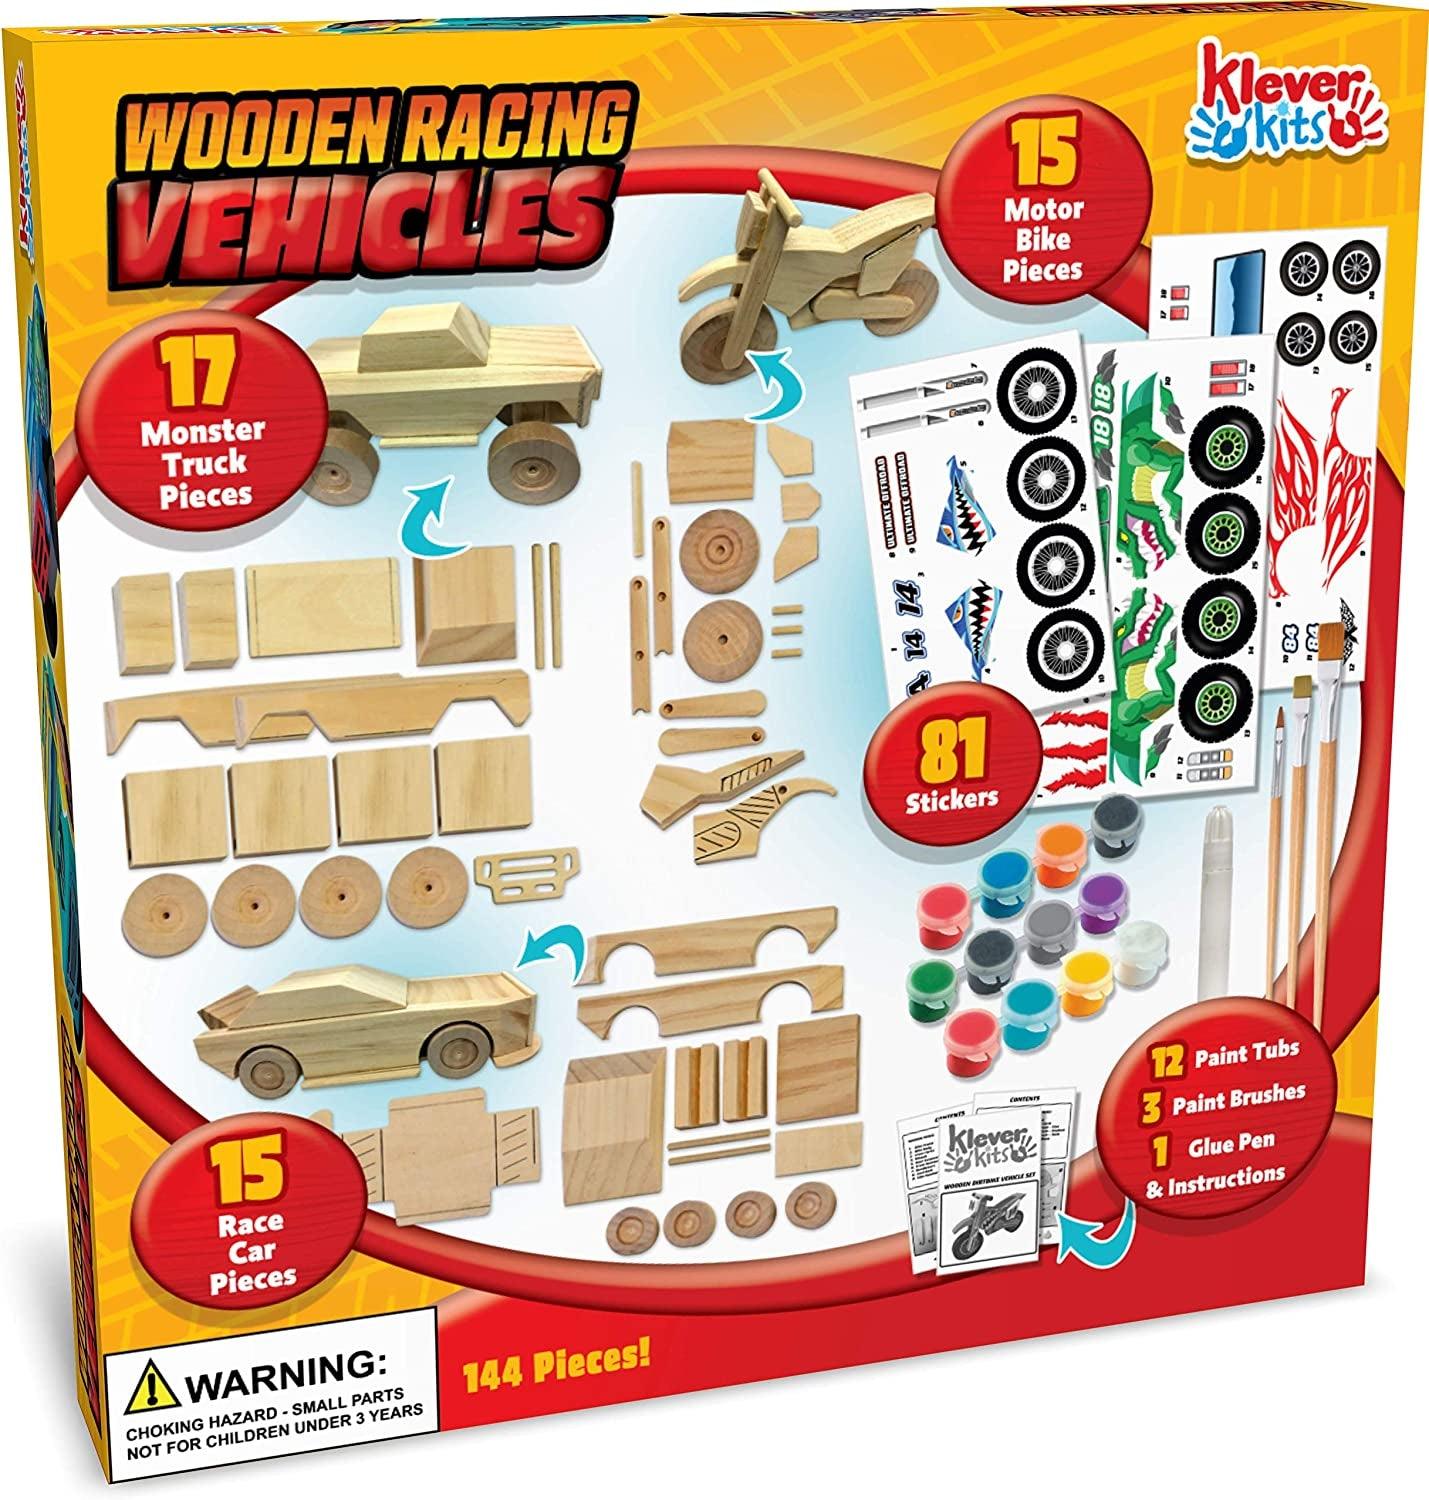 Build & Paint Your Own Wooden Cars DIY Wood Craft Kit 3 Race Cars